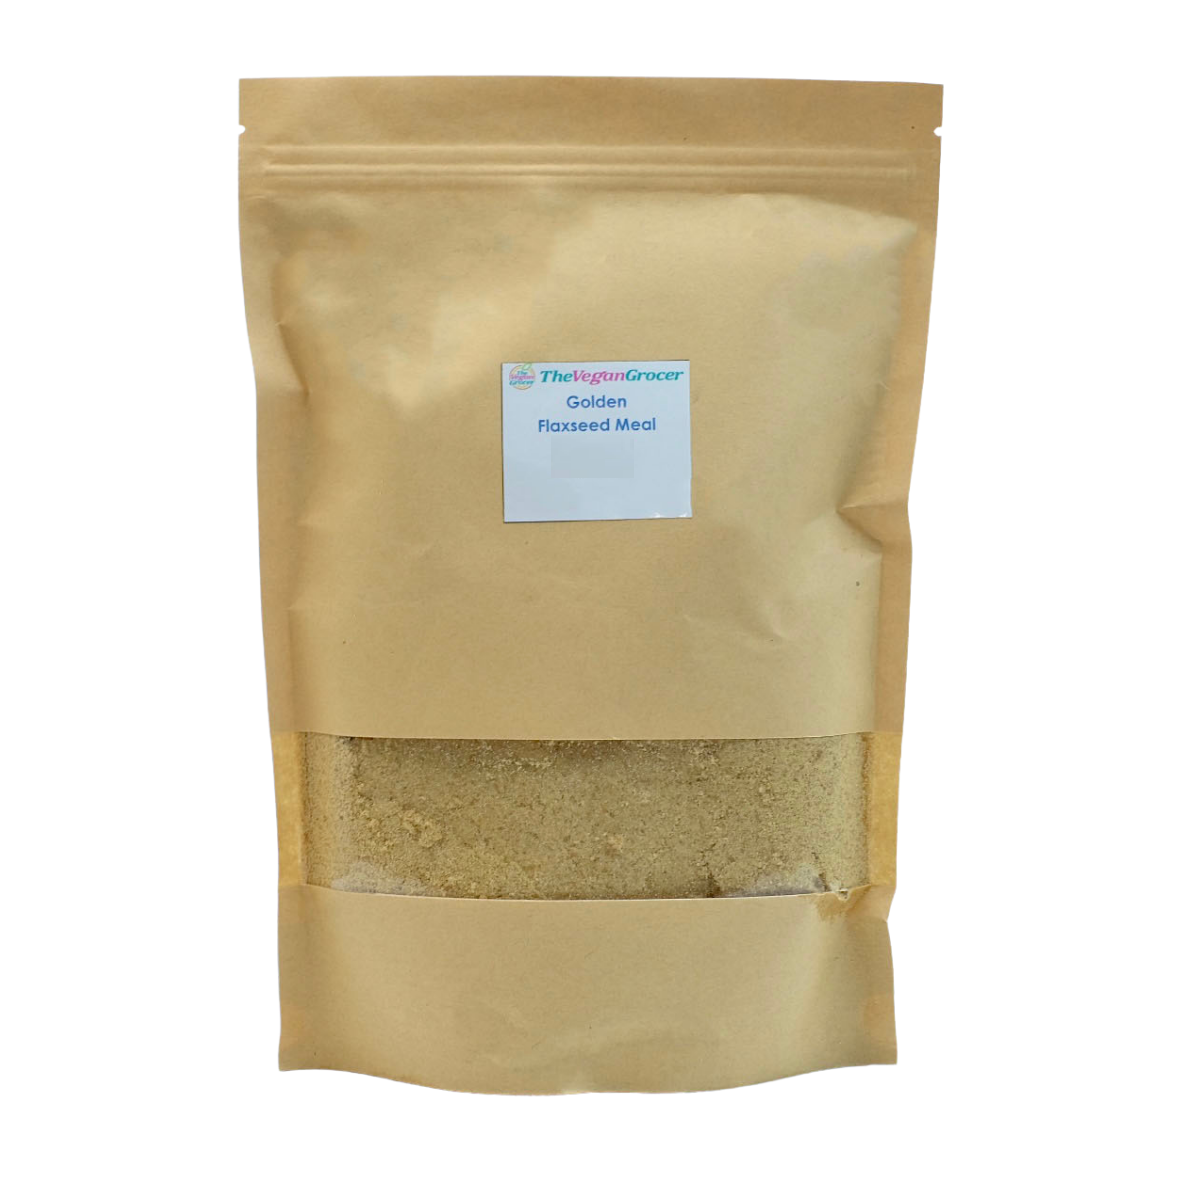 Golden Flaxseed Meal egg-replacer